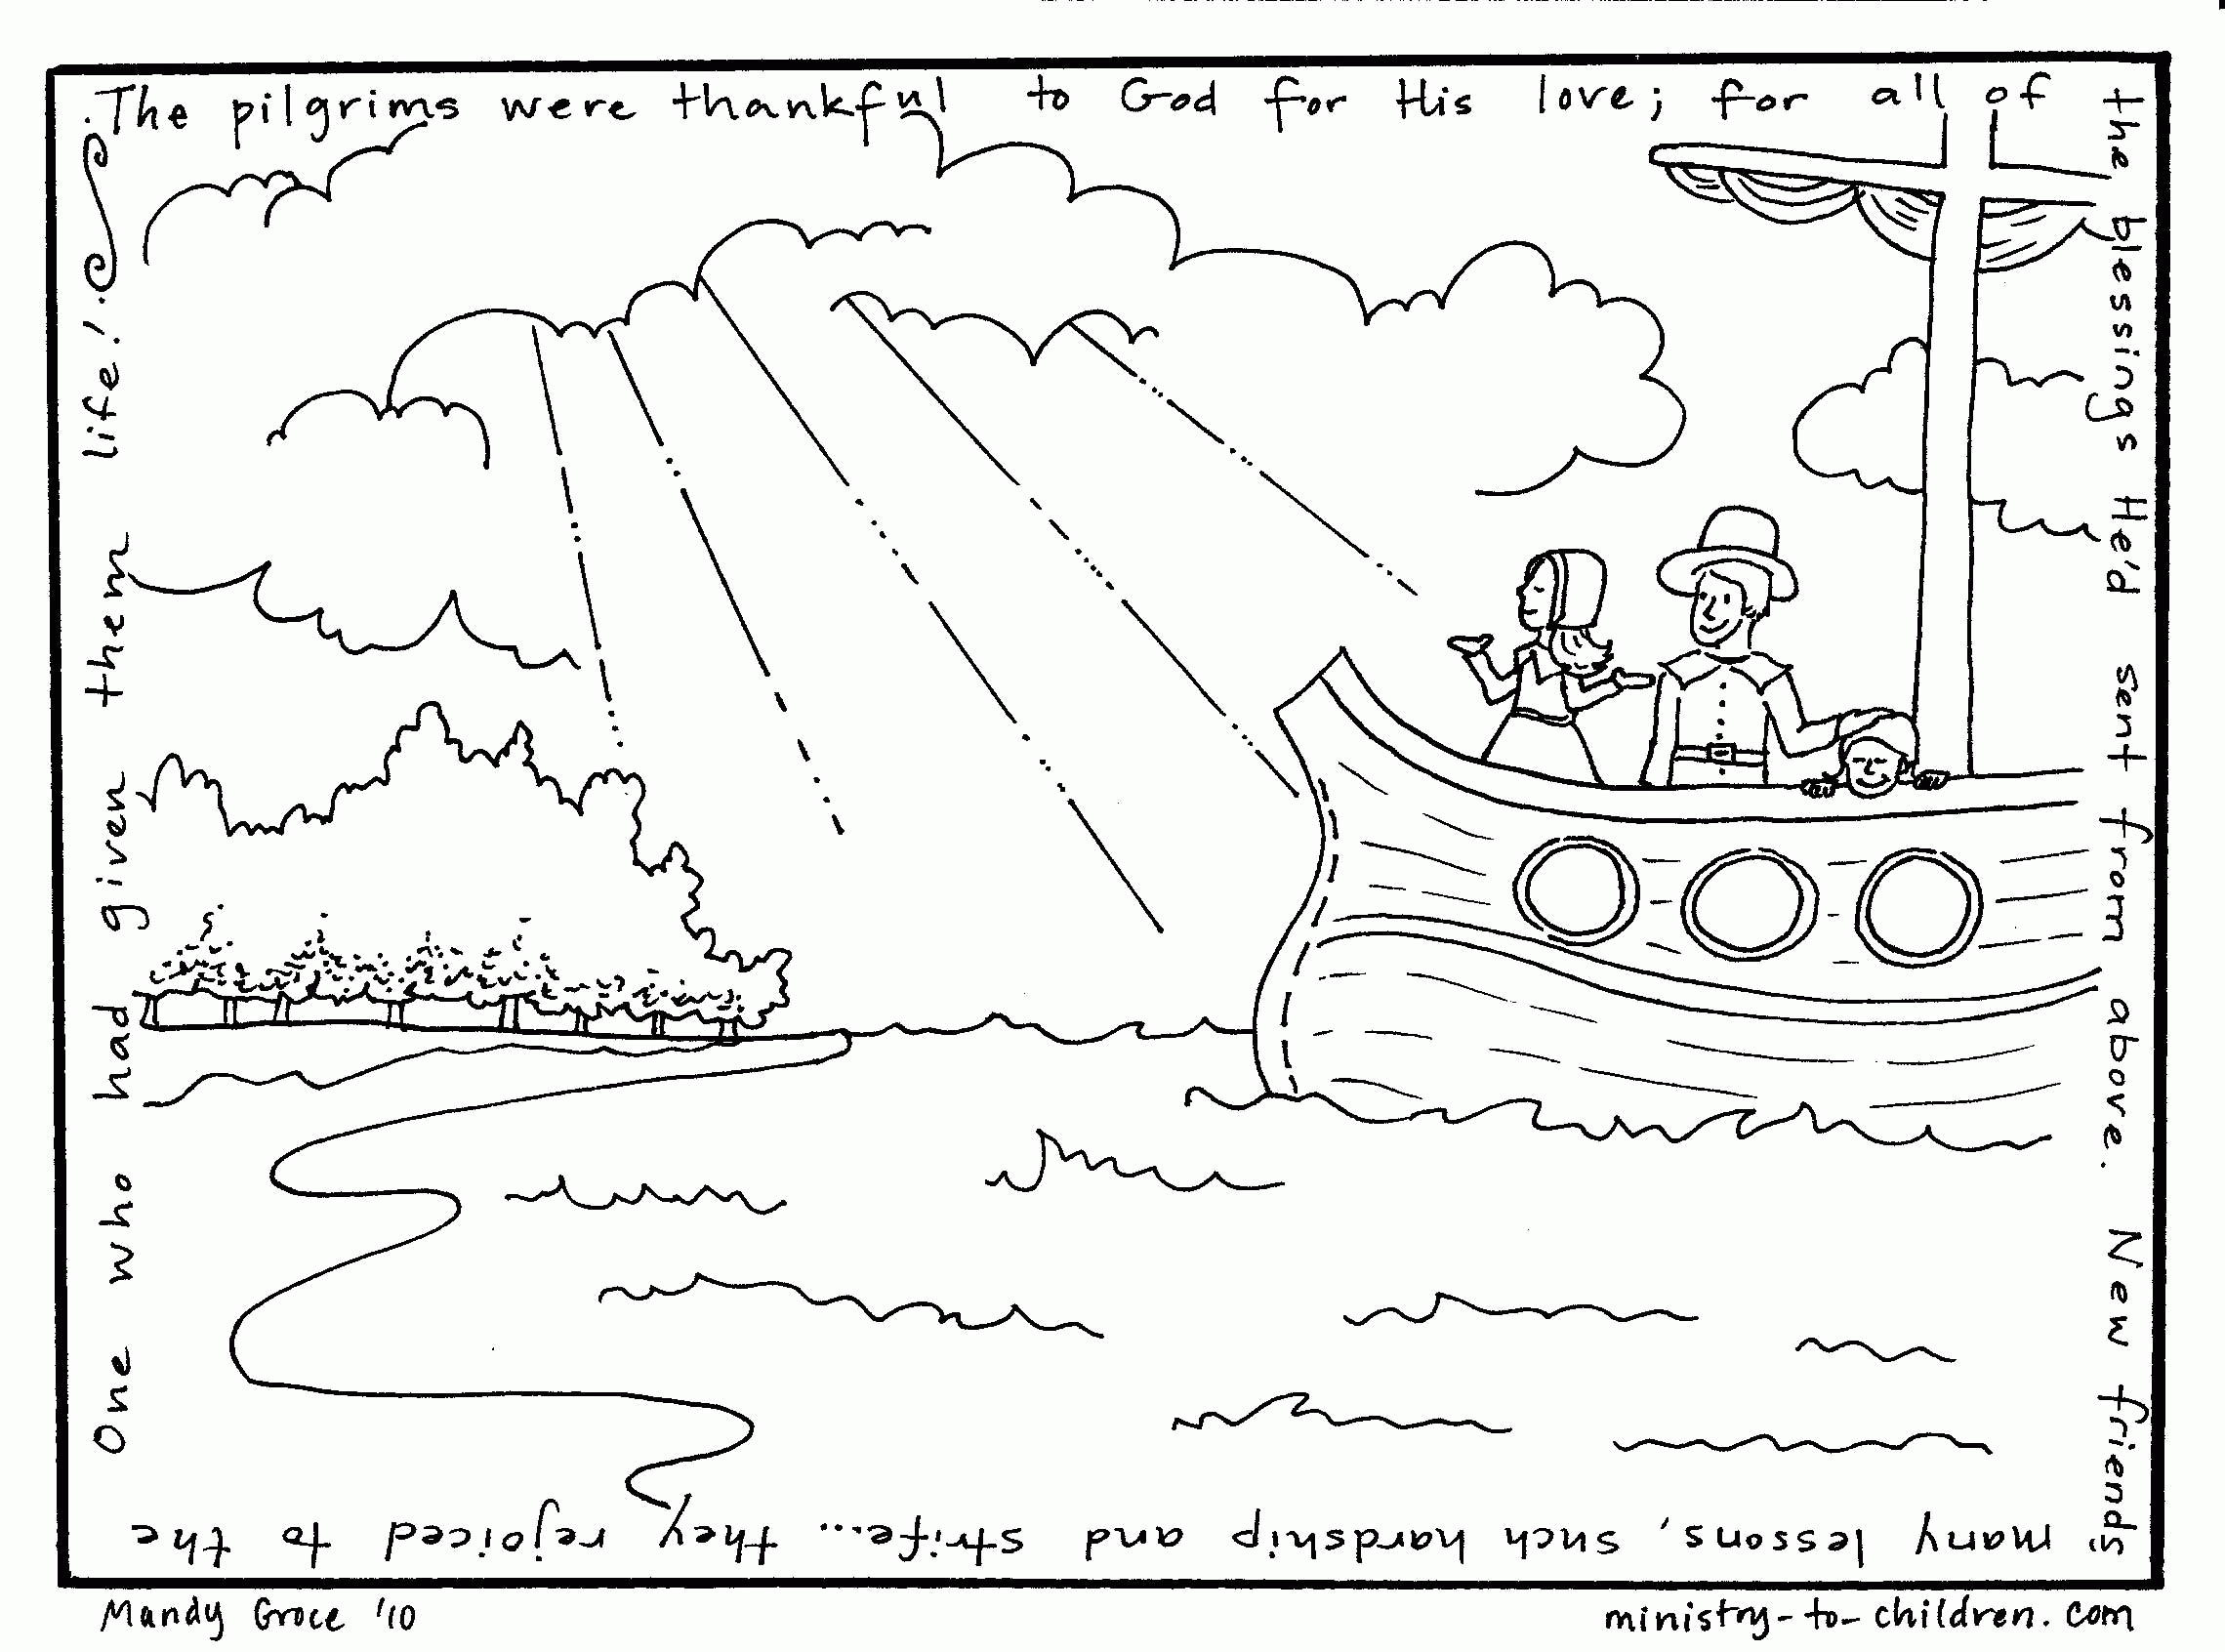 Pilgrims Thanksgiving to God Coloring Page (free printable)